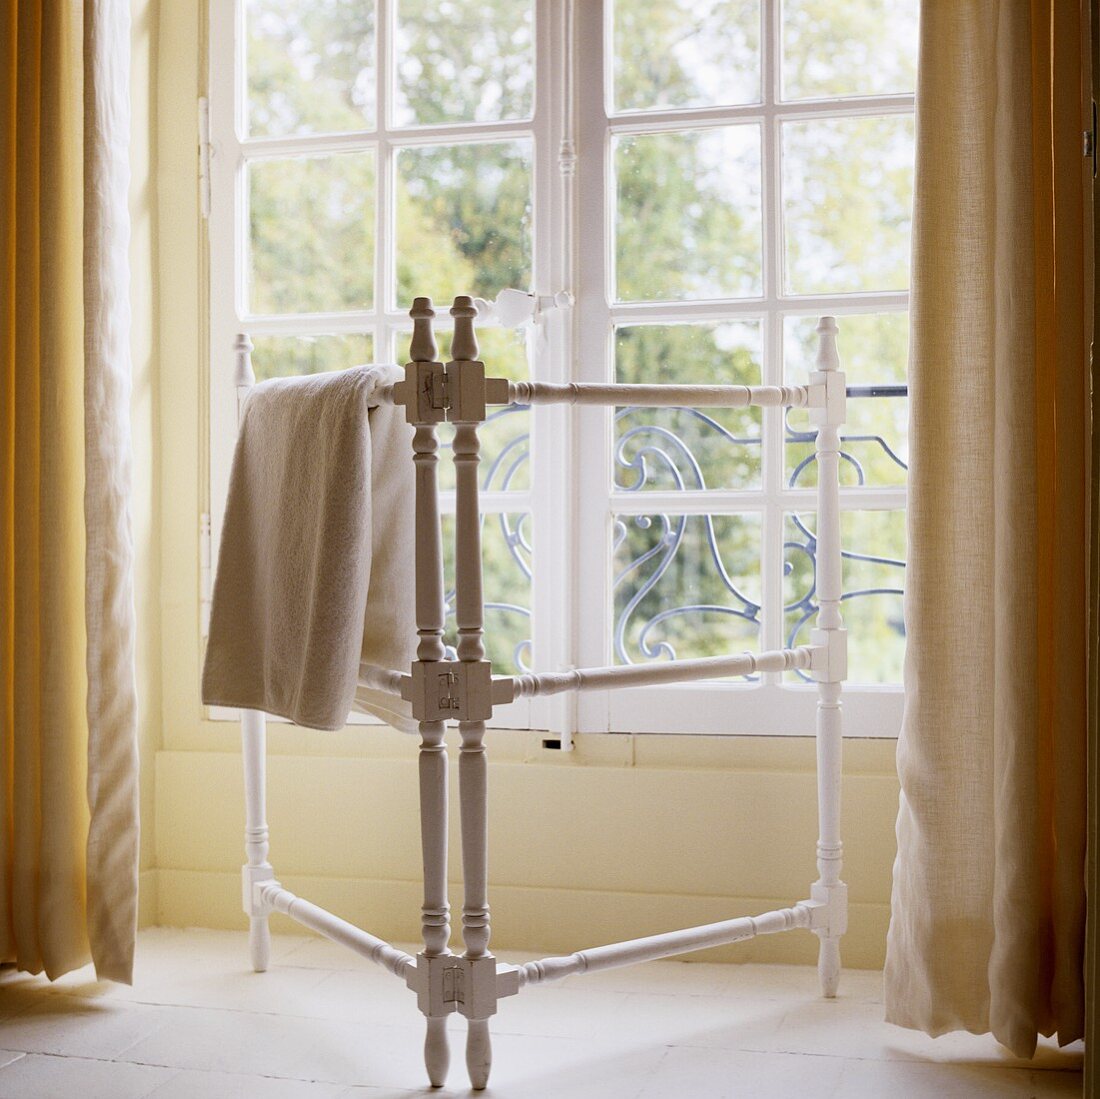 A towel rack in front of a window in country house